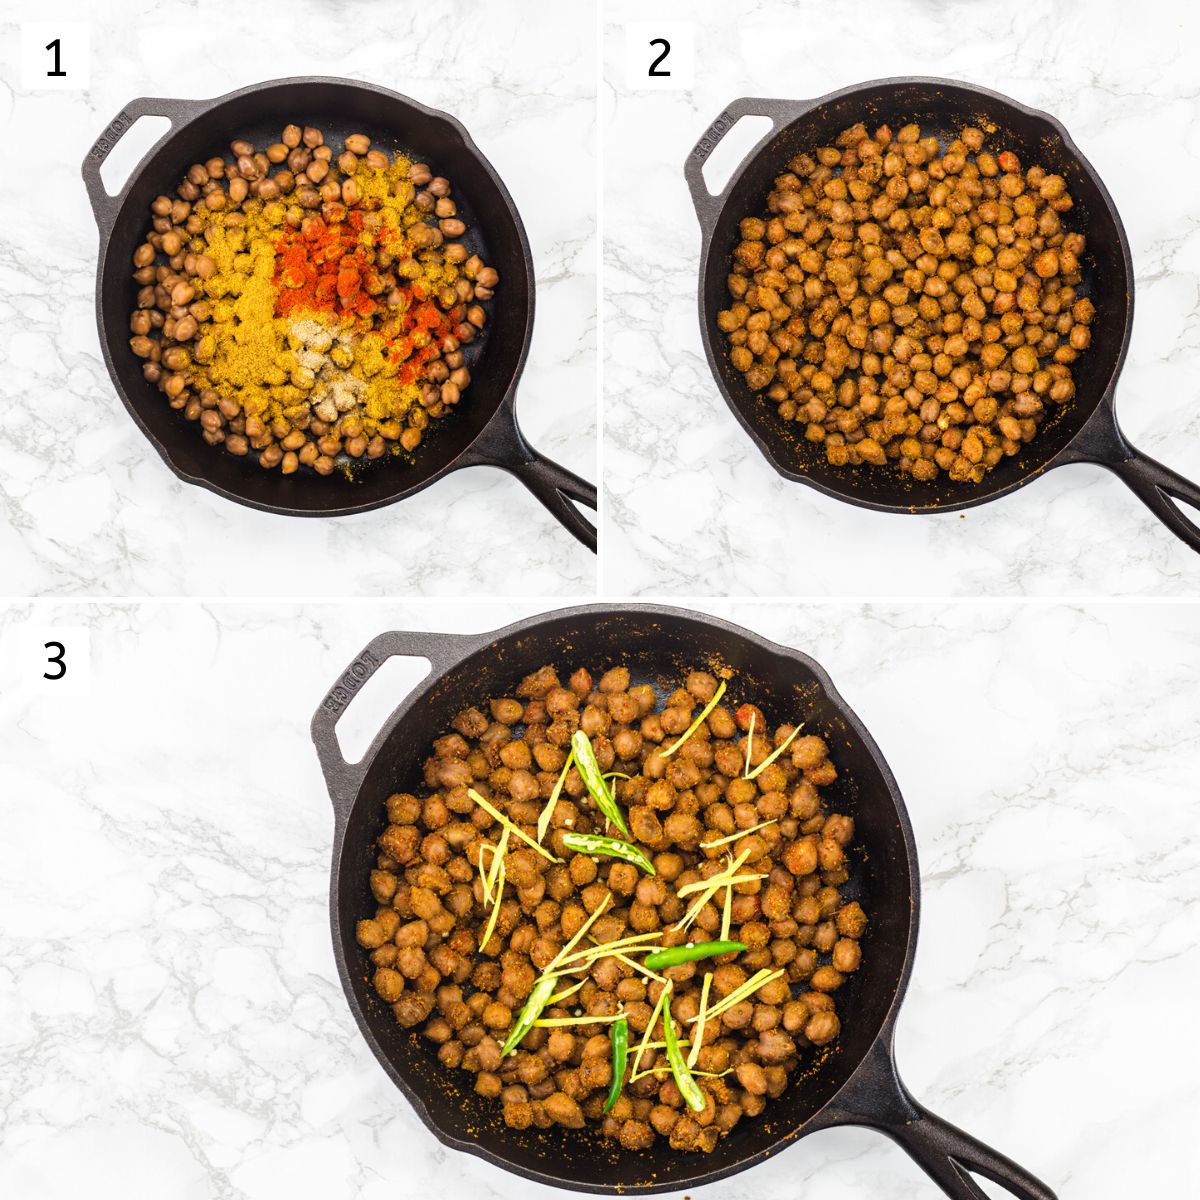 Collage of 3 images showing adding spices to chickpeas and adding ginger, chilies.